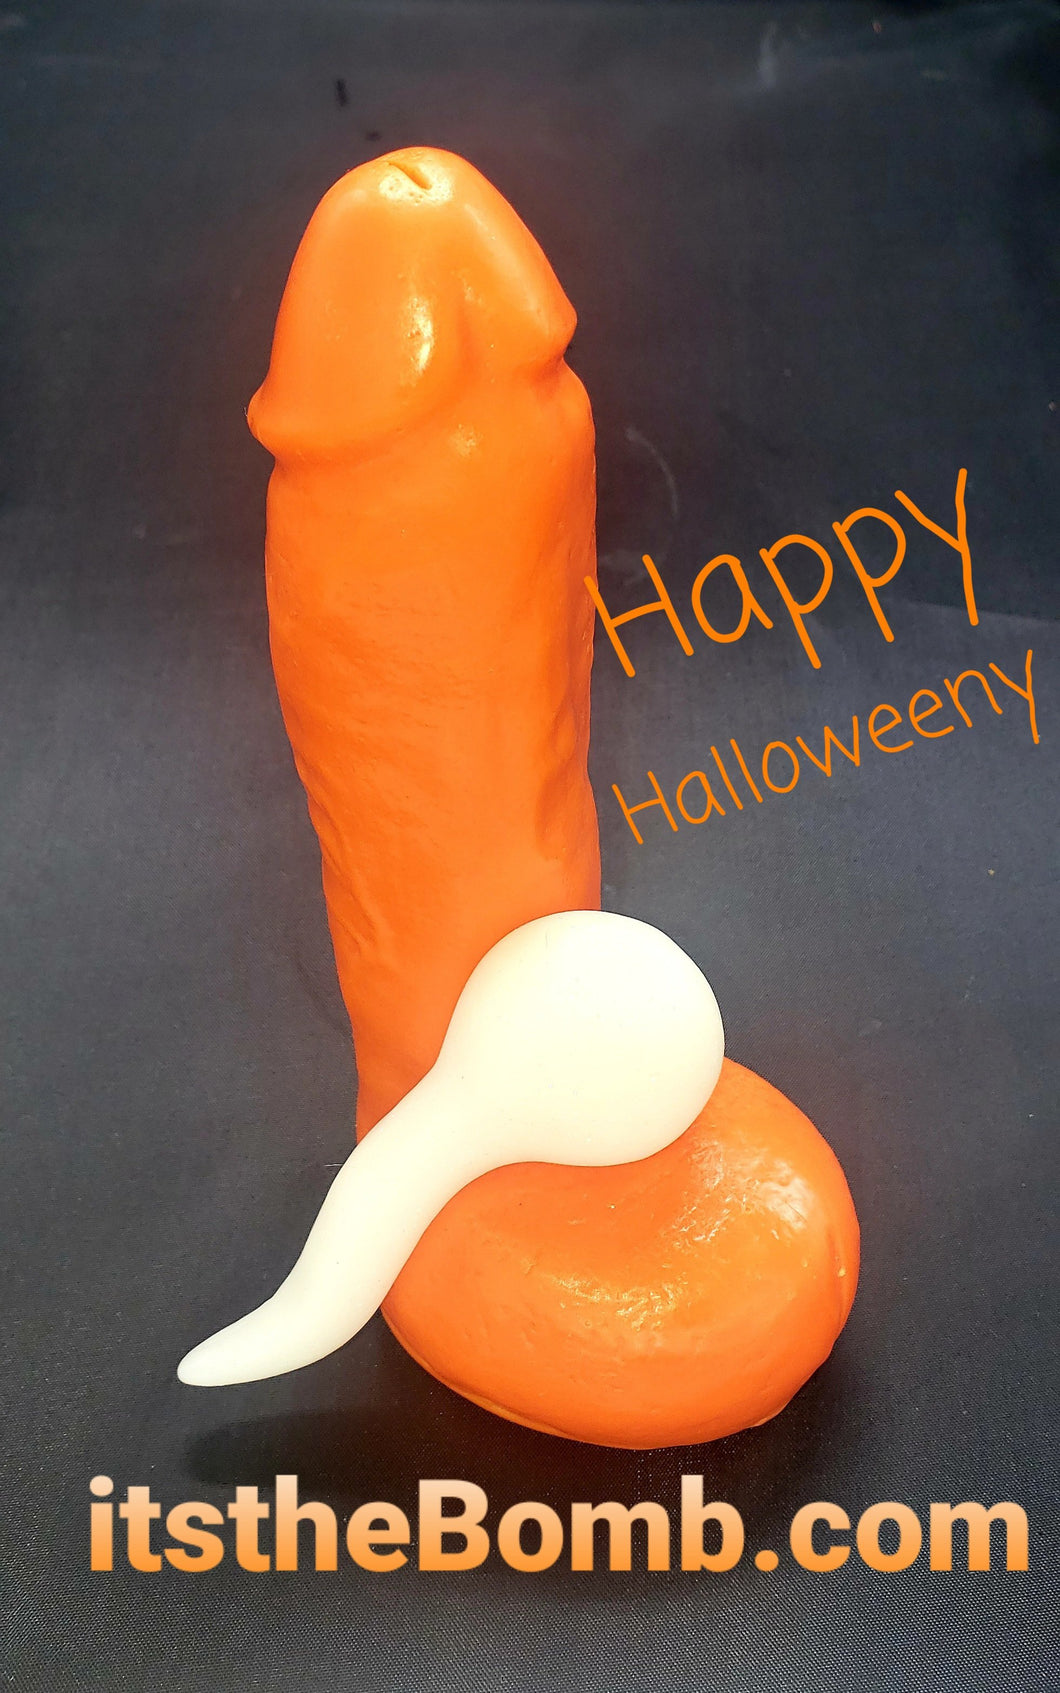 Happy Halloweeny 'Stroker Jr' Orange Penis Party Soap with A Cute 'Spermie' Soap WHIMSICAL & NAUGHTY Dirty Clean Fun Orange Halloween 'Stroker JR' Penis Party Soap with Spermie  